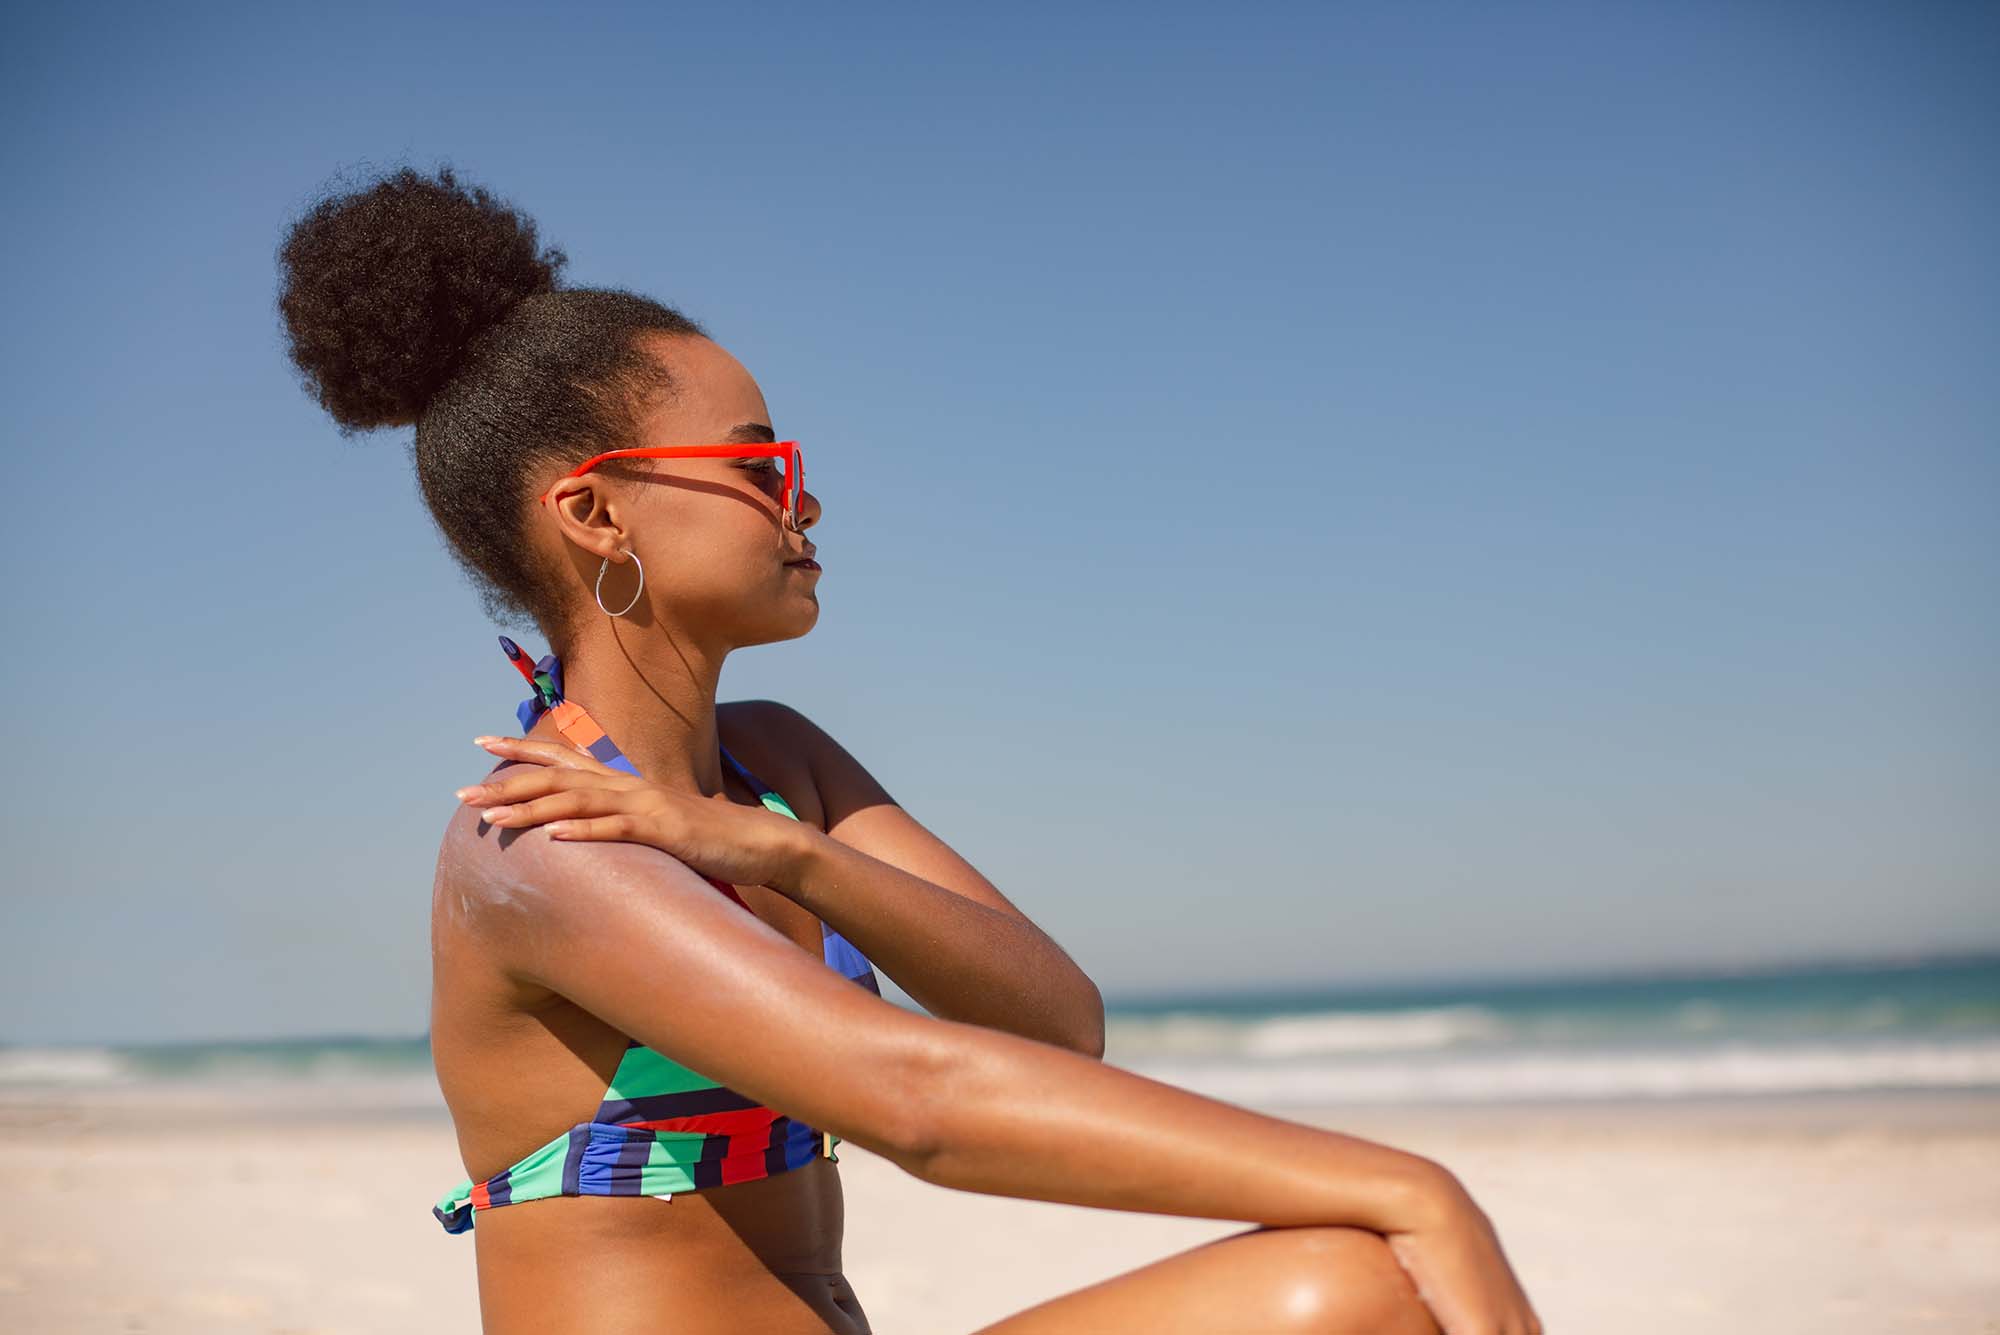 Sun Protection Tips for Those with Black and Brown Skin, BU Today